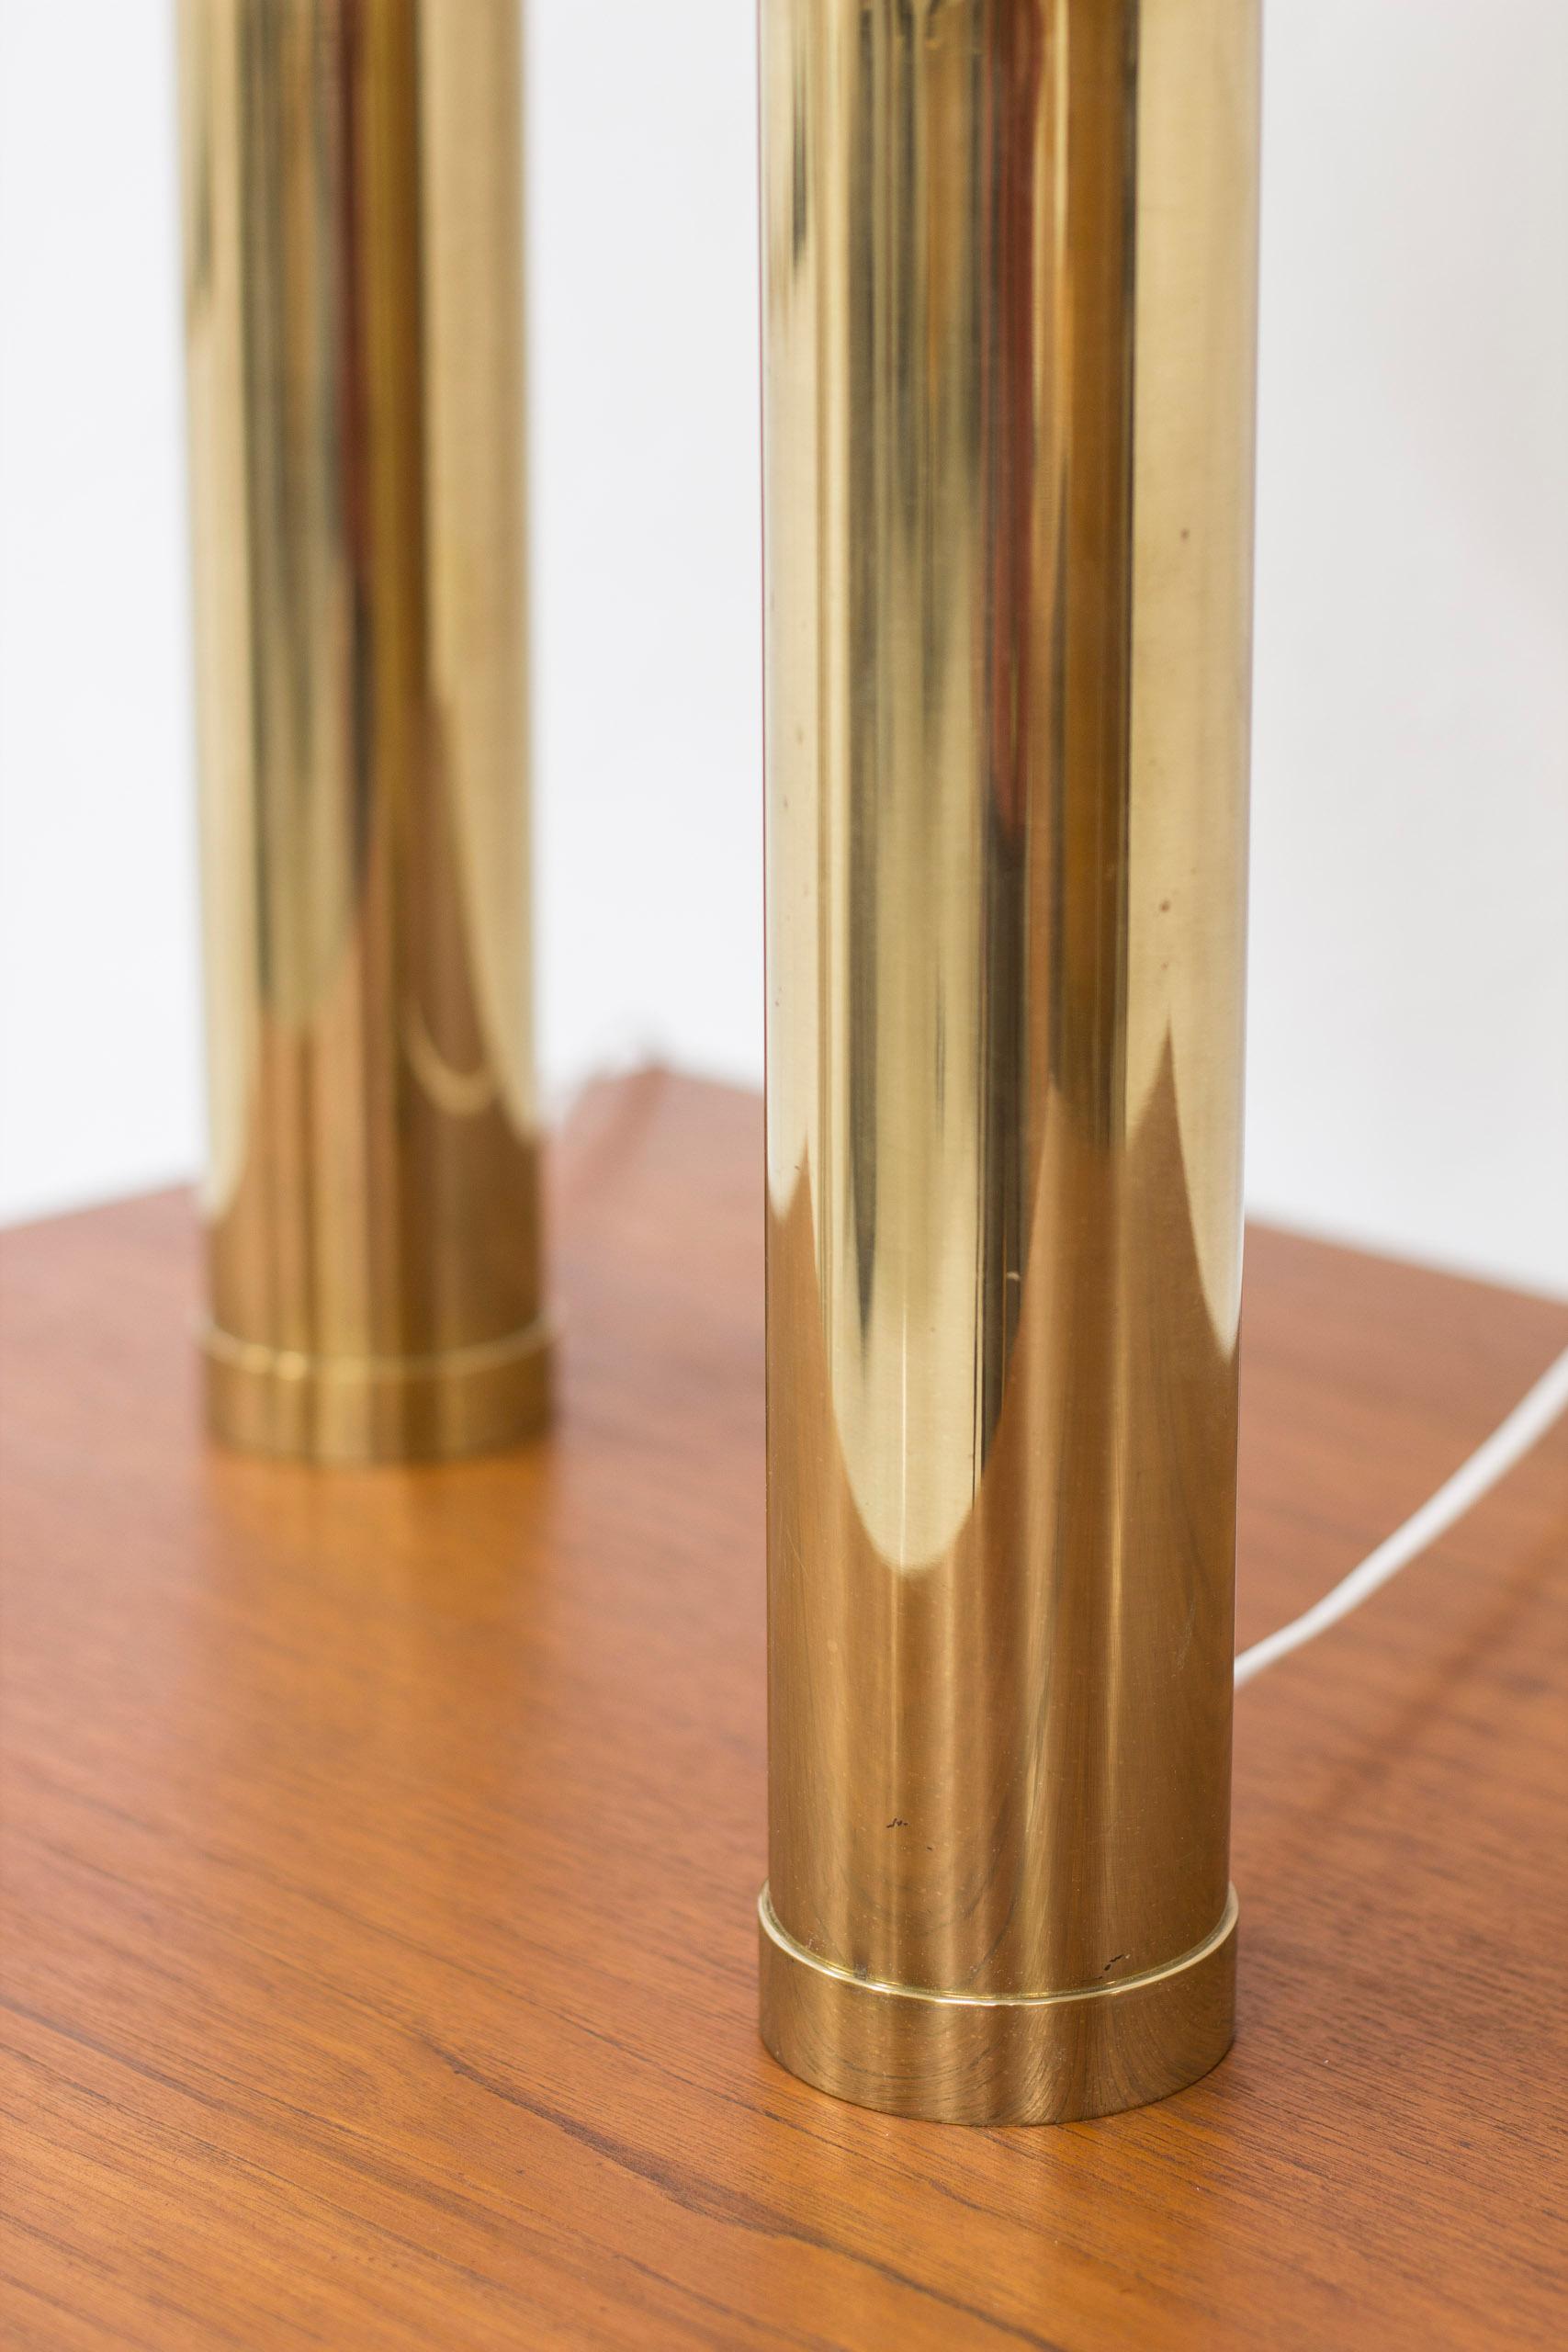 Pair of Brass Table Lamps by Bergboms, Sweden, 1960s, 4 Pcs Total For Sale 1